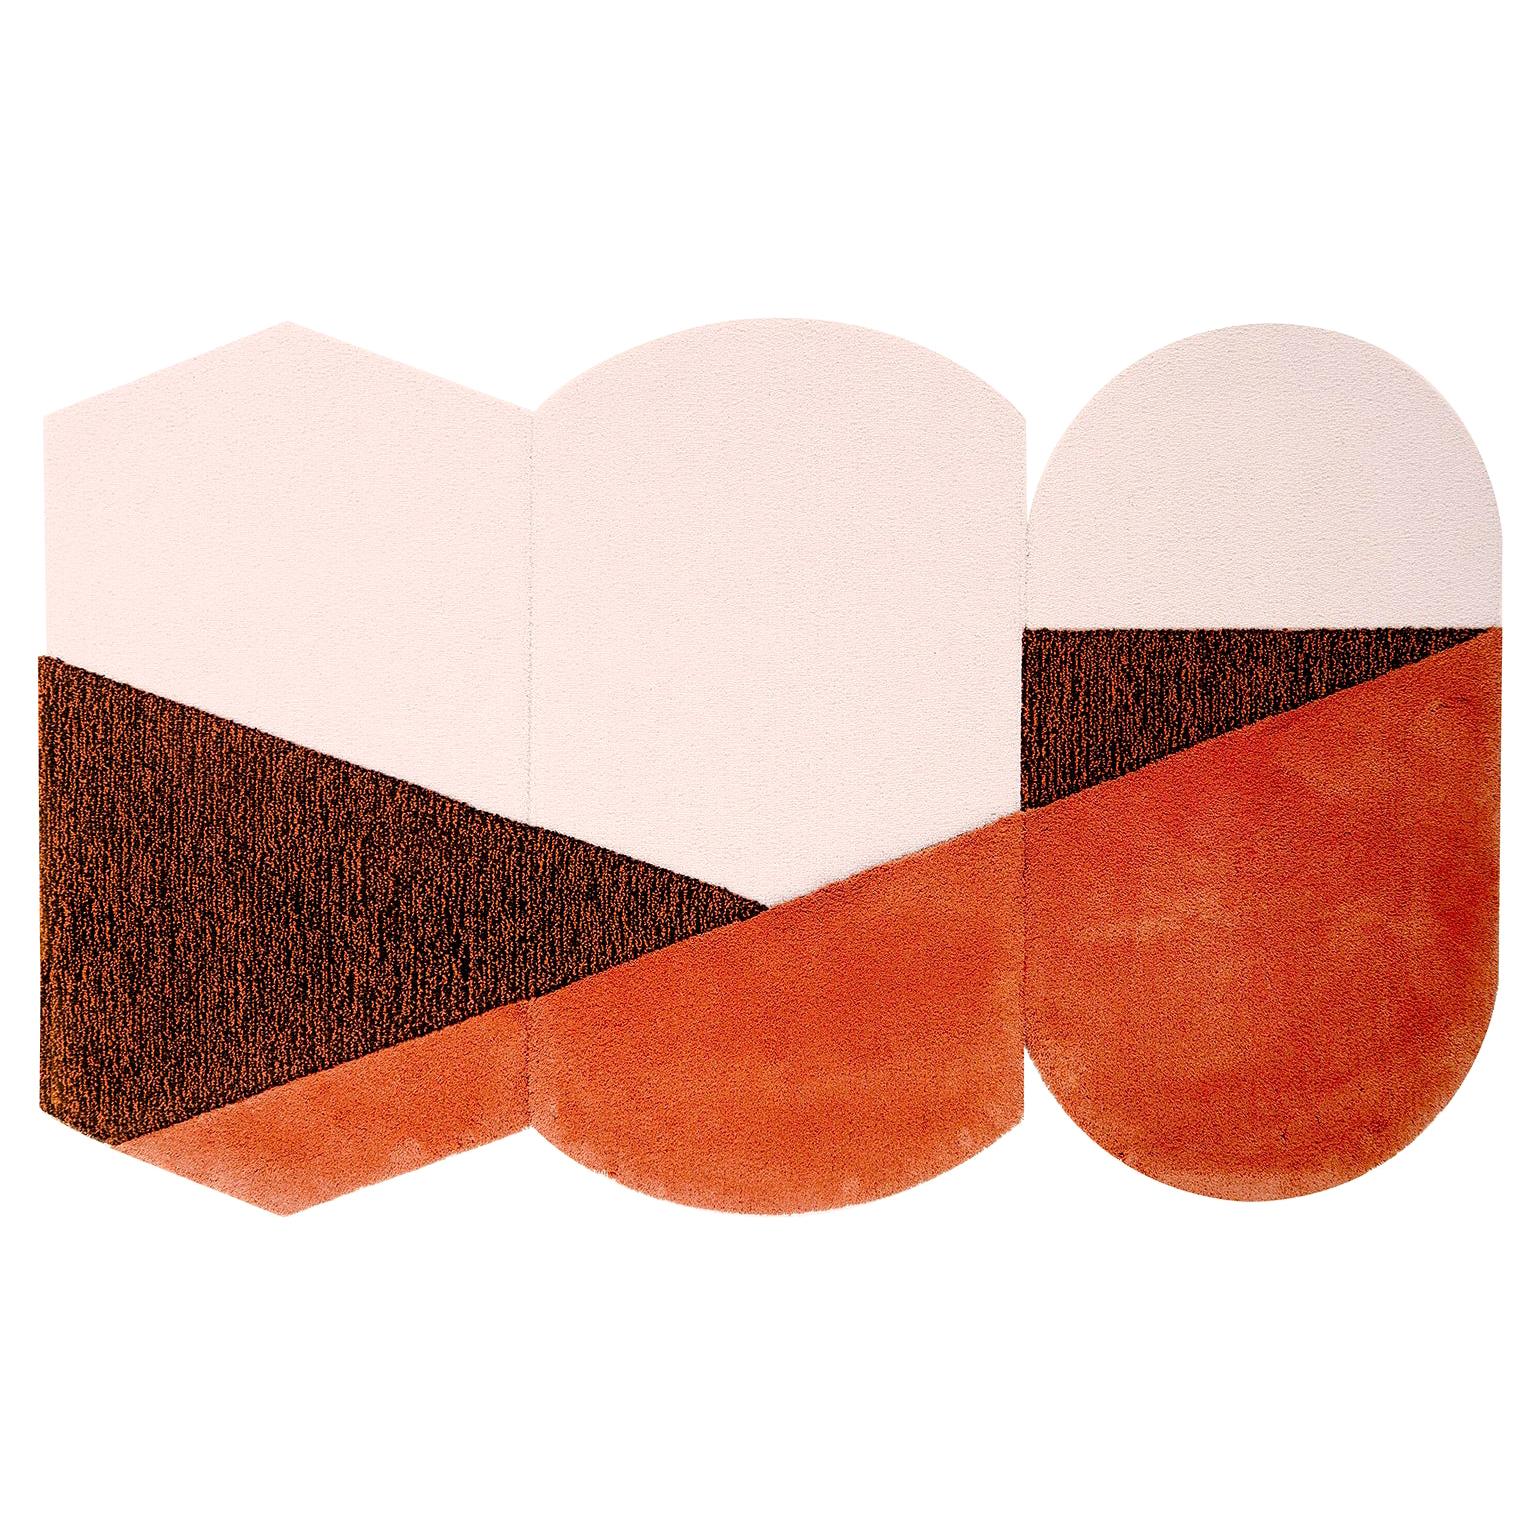 Oci Triptych M, Composition of 3 Rugs 100% Wool / Brick Brown Pink by Portego